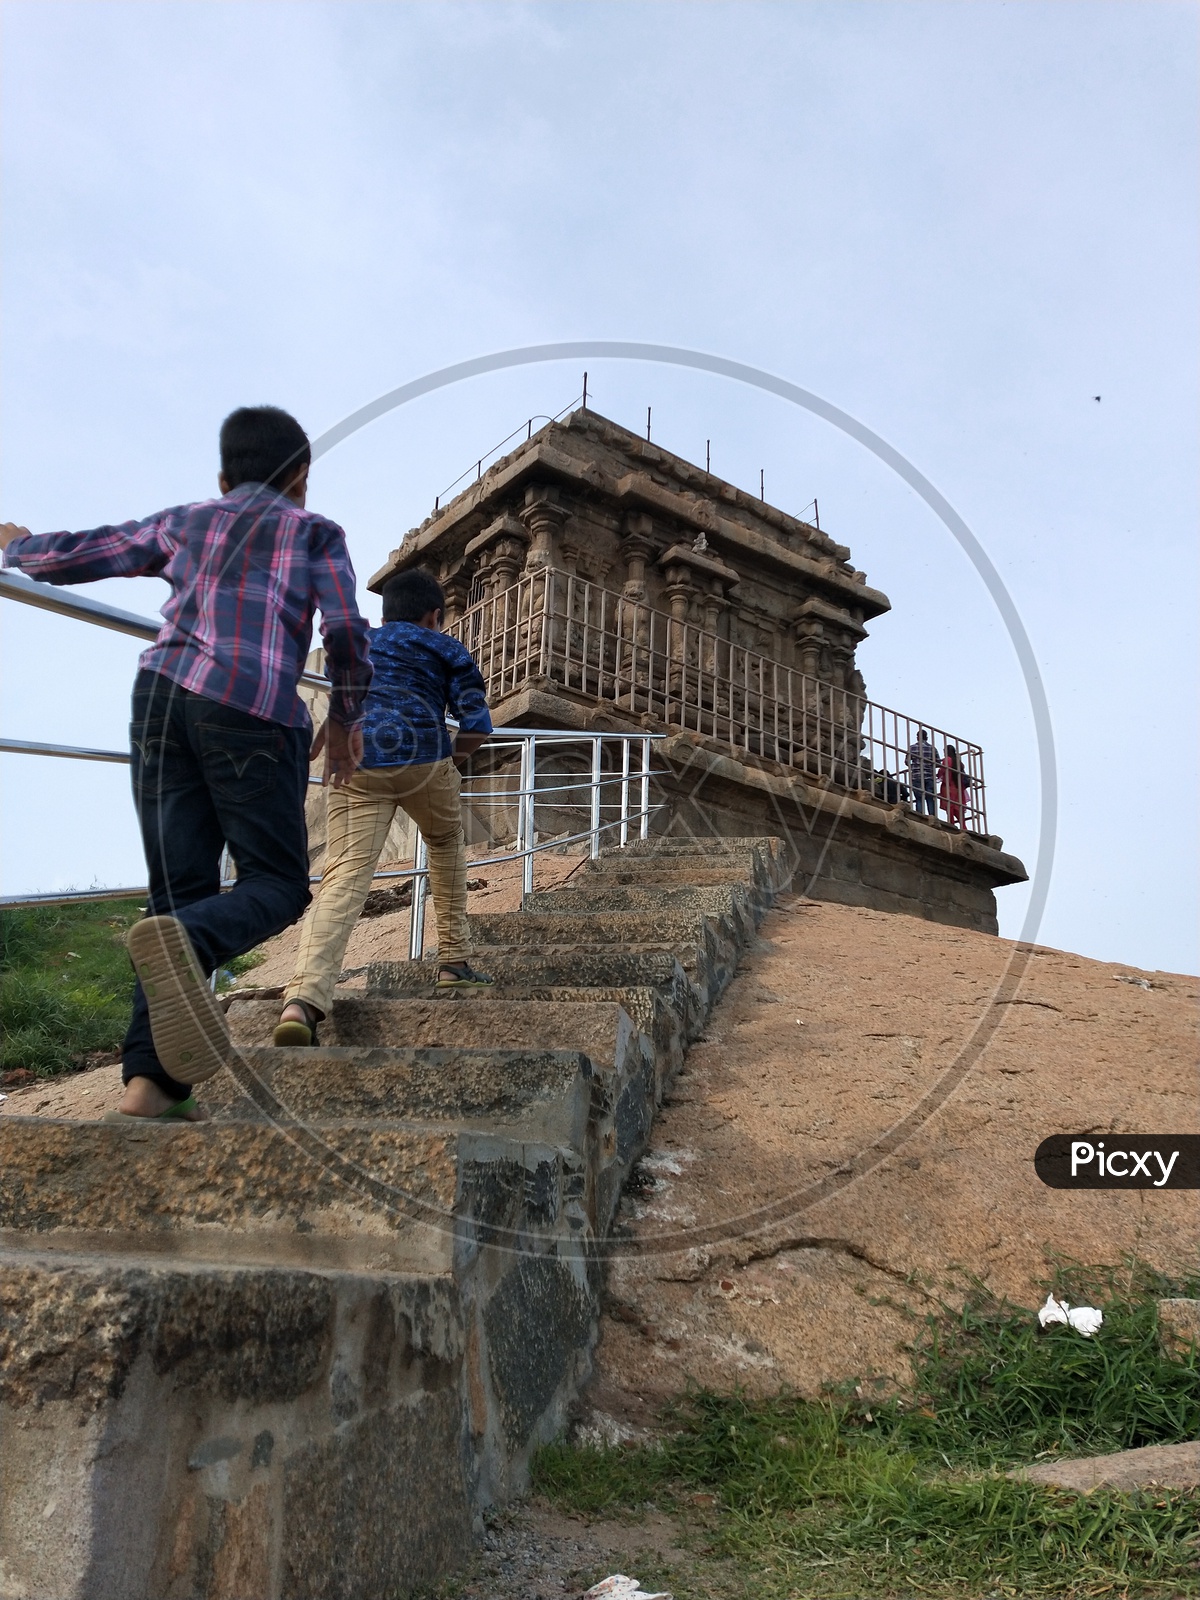 Children running to reach the top of the temple